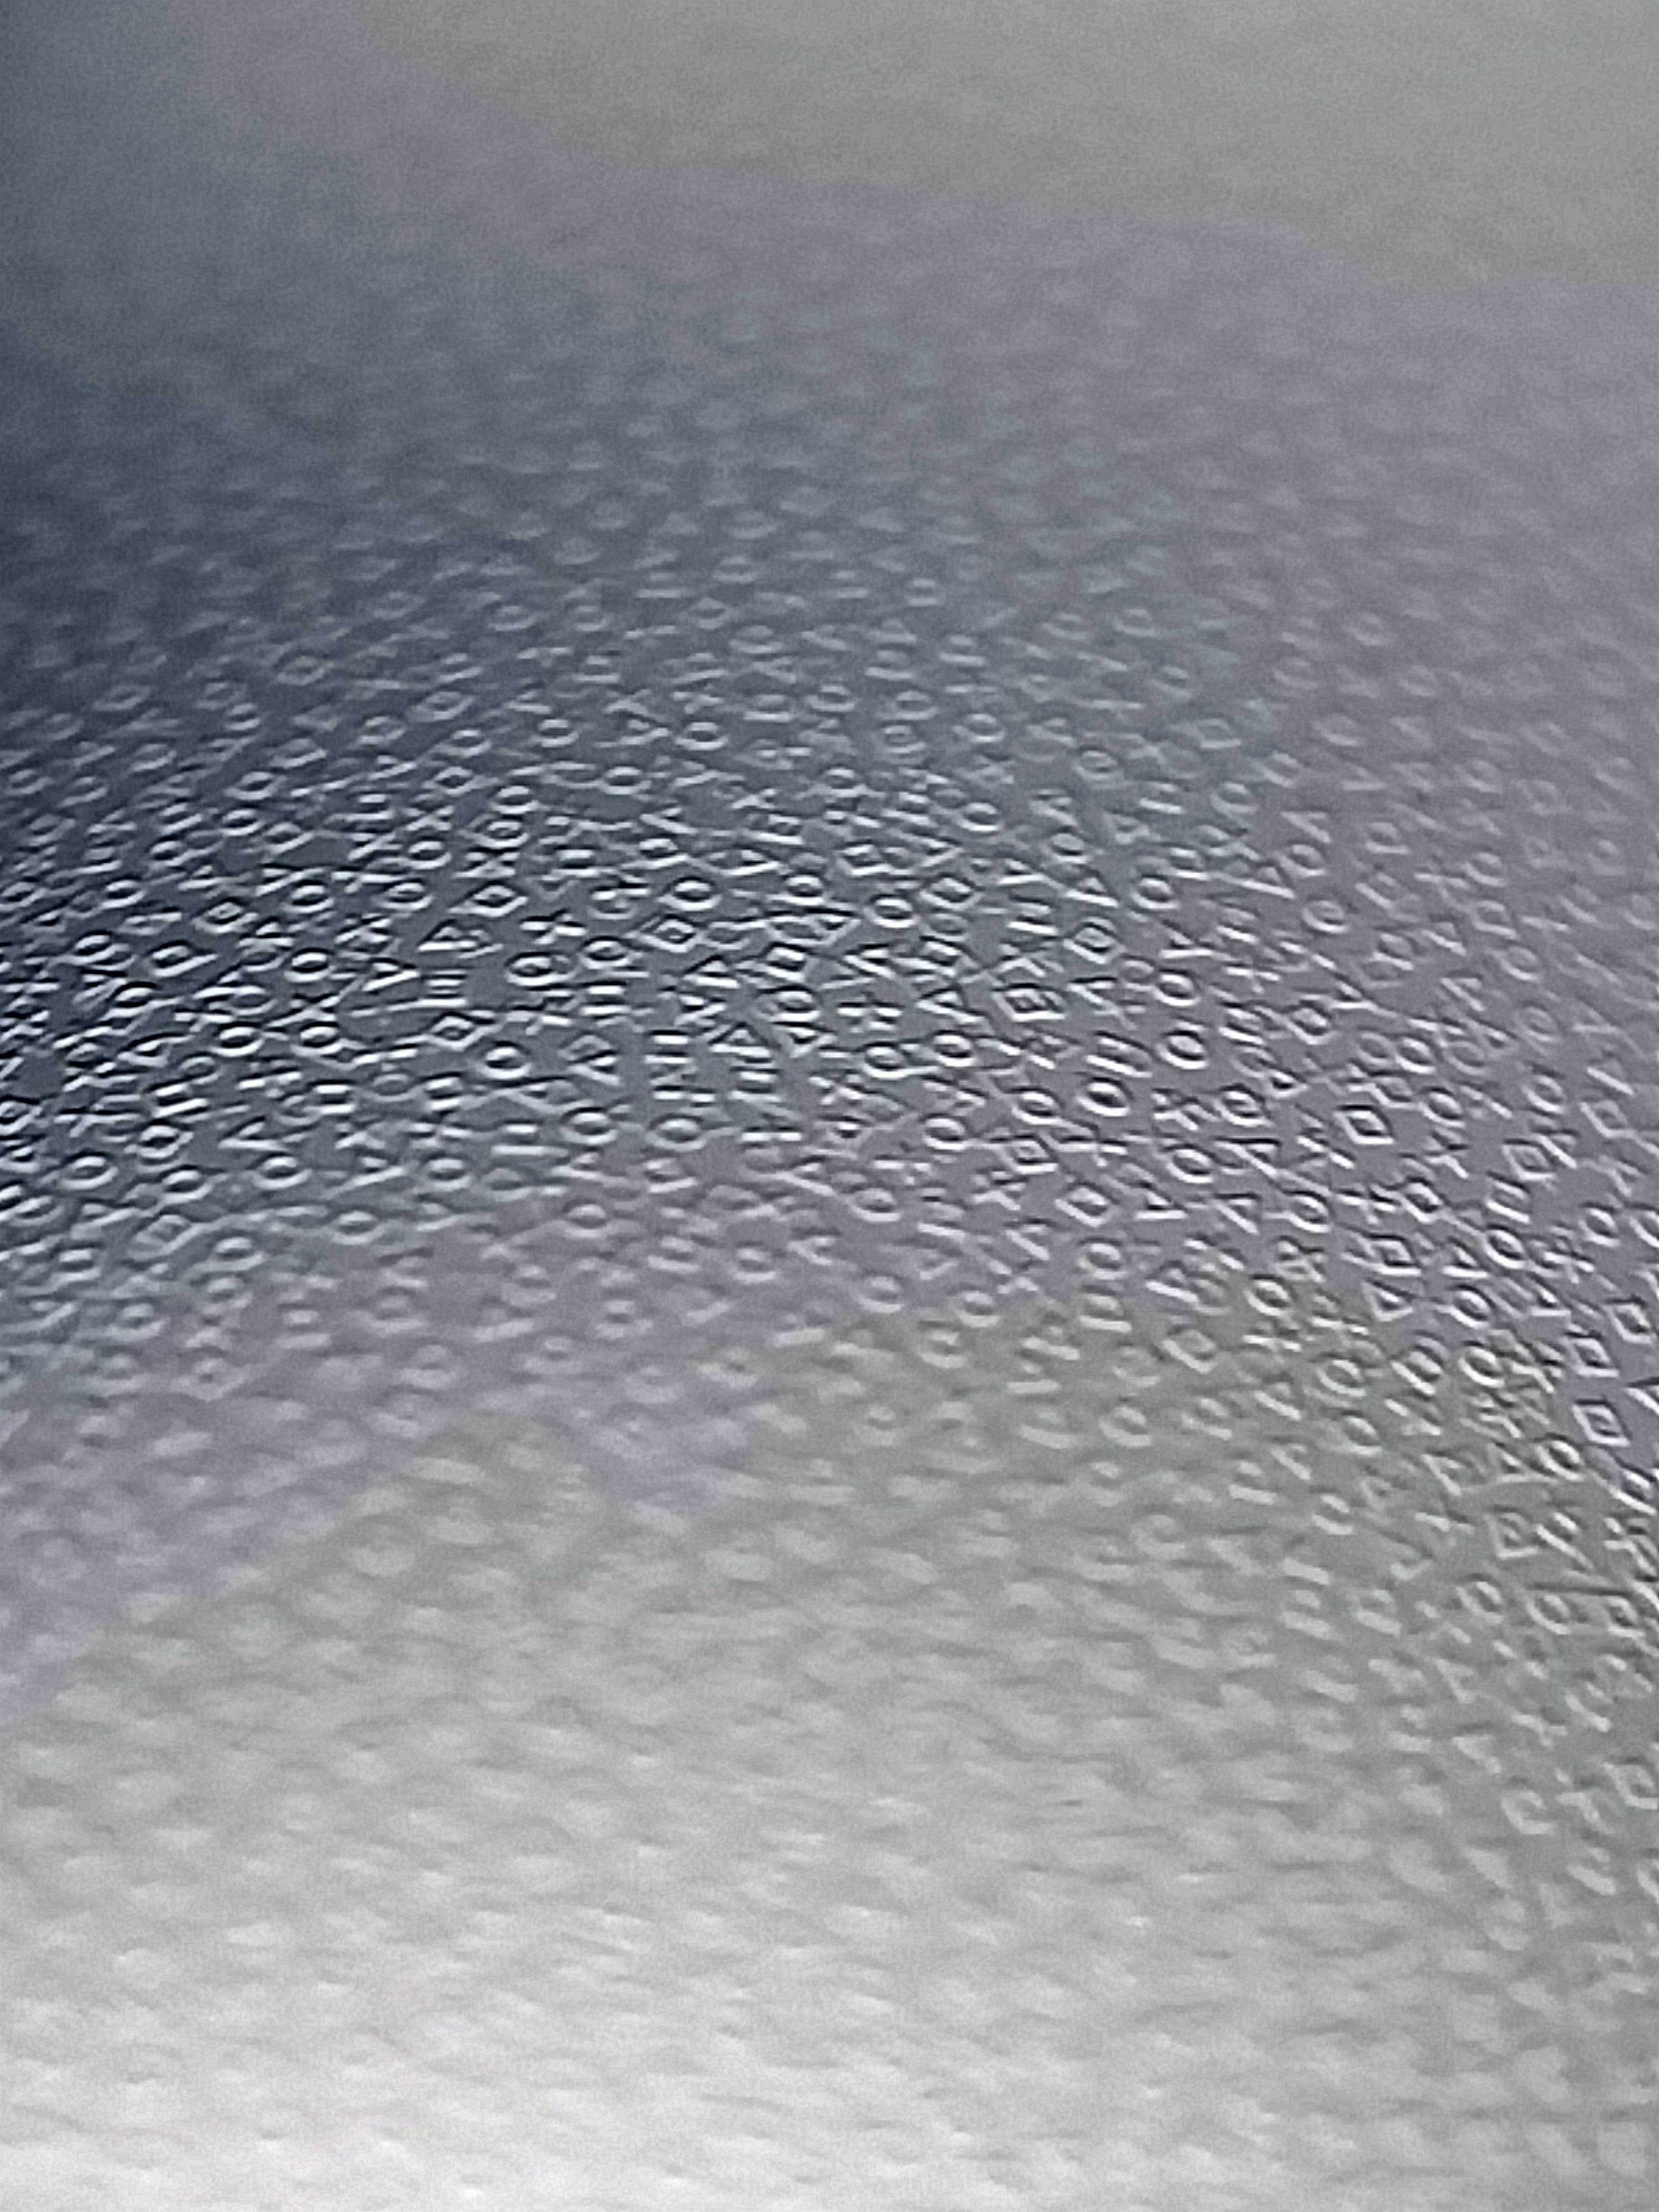 Close-up of surface with a mass of symbols